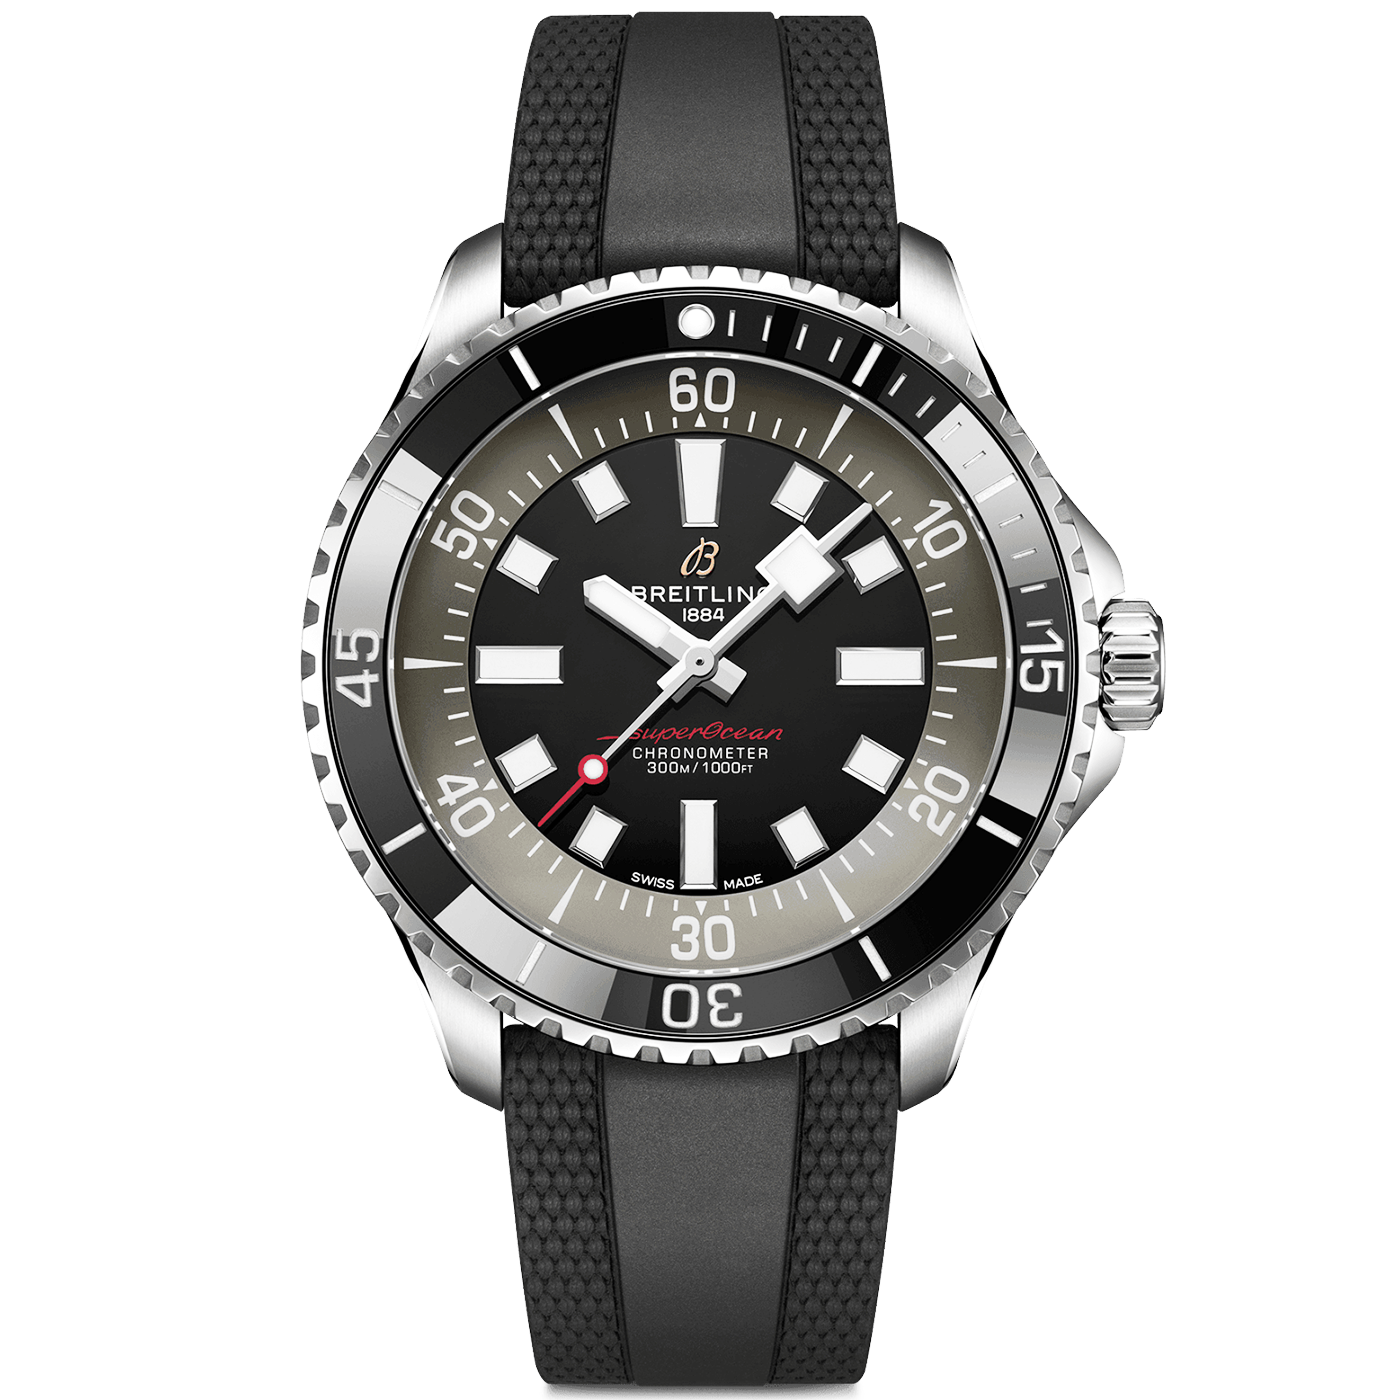 Superocean 44mm UK Limited Edition Rubber Strap Watch